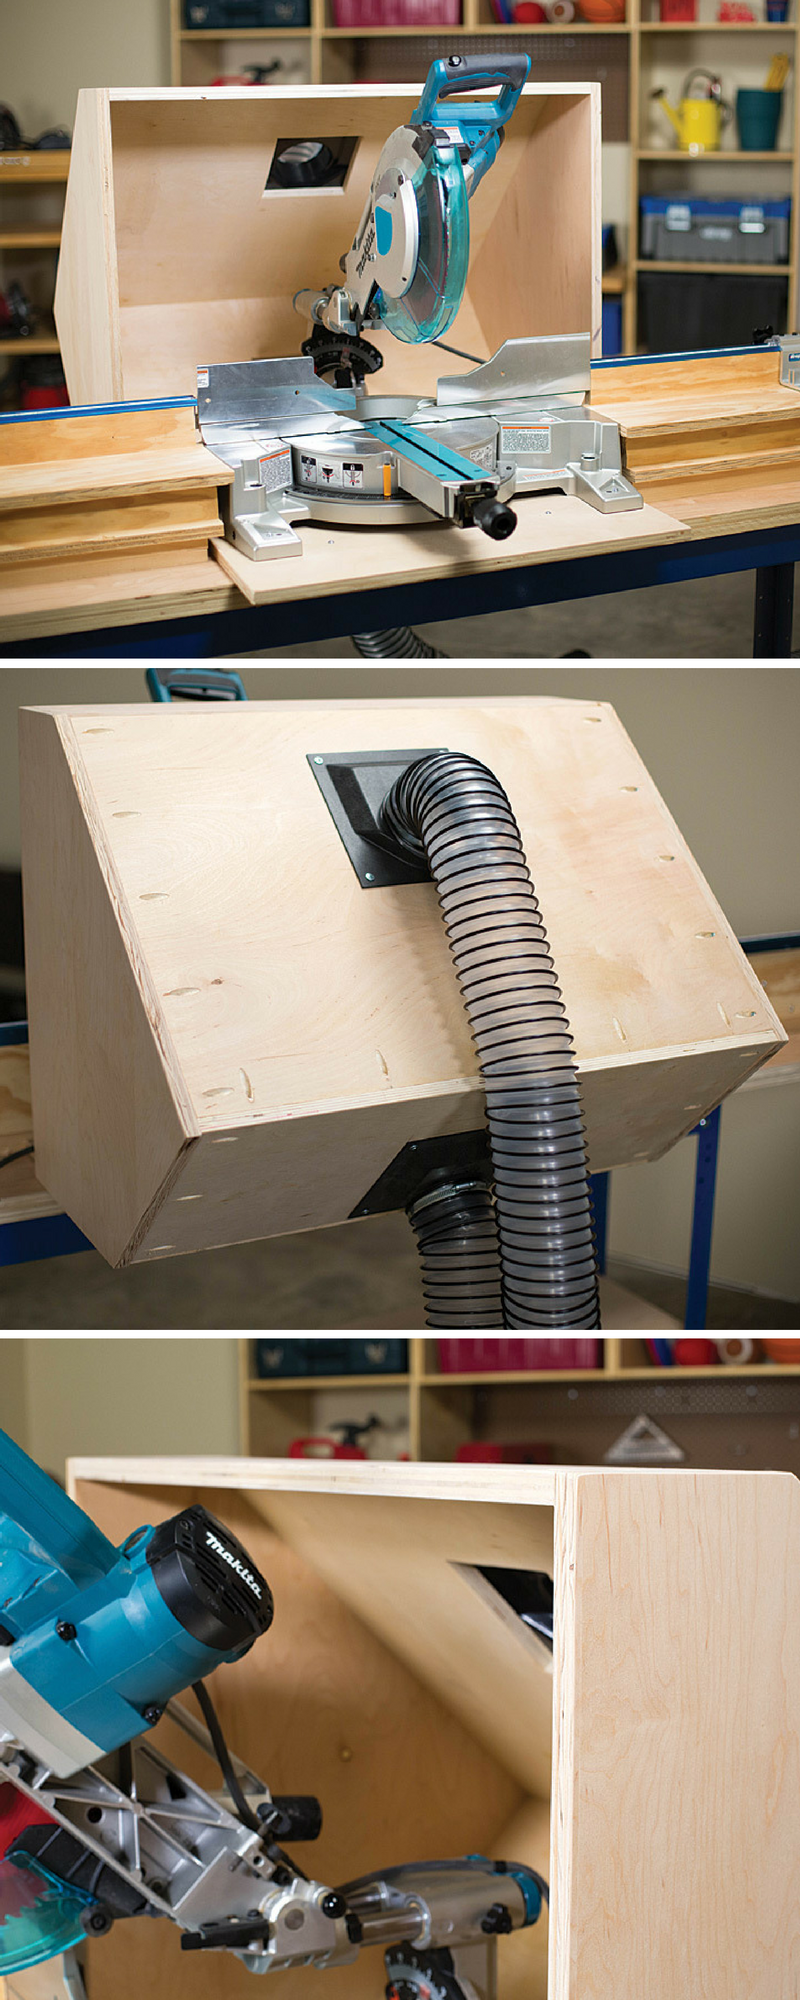 A miter saw is one of the handiest tools you can own, and one of the messiest. The chips and sawdust it creates get everywhere. This dust hood helps corral the mess by giving it somewhere to go—into a dust collector or shop vacuum. You can build a hood for your saw from plywood and a few fittings. -   19 shop fitness
 ideas